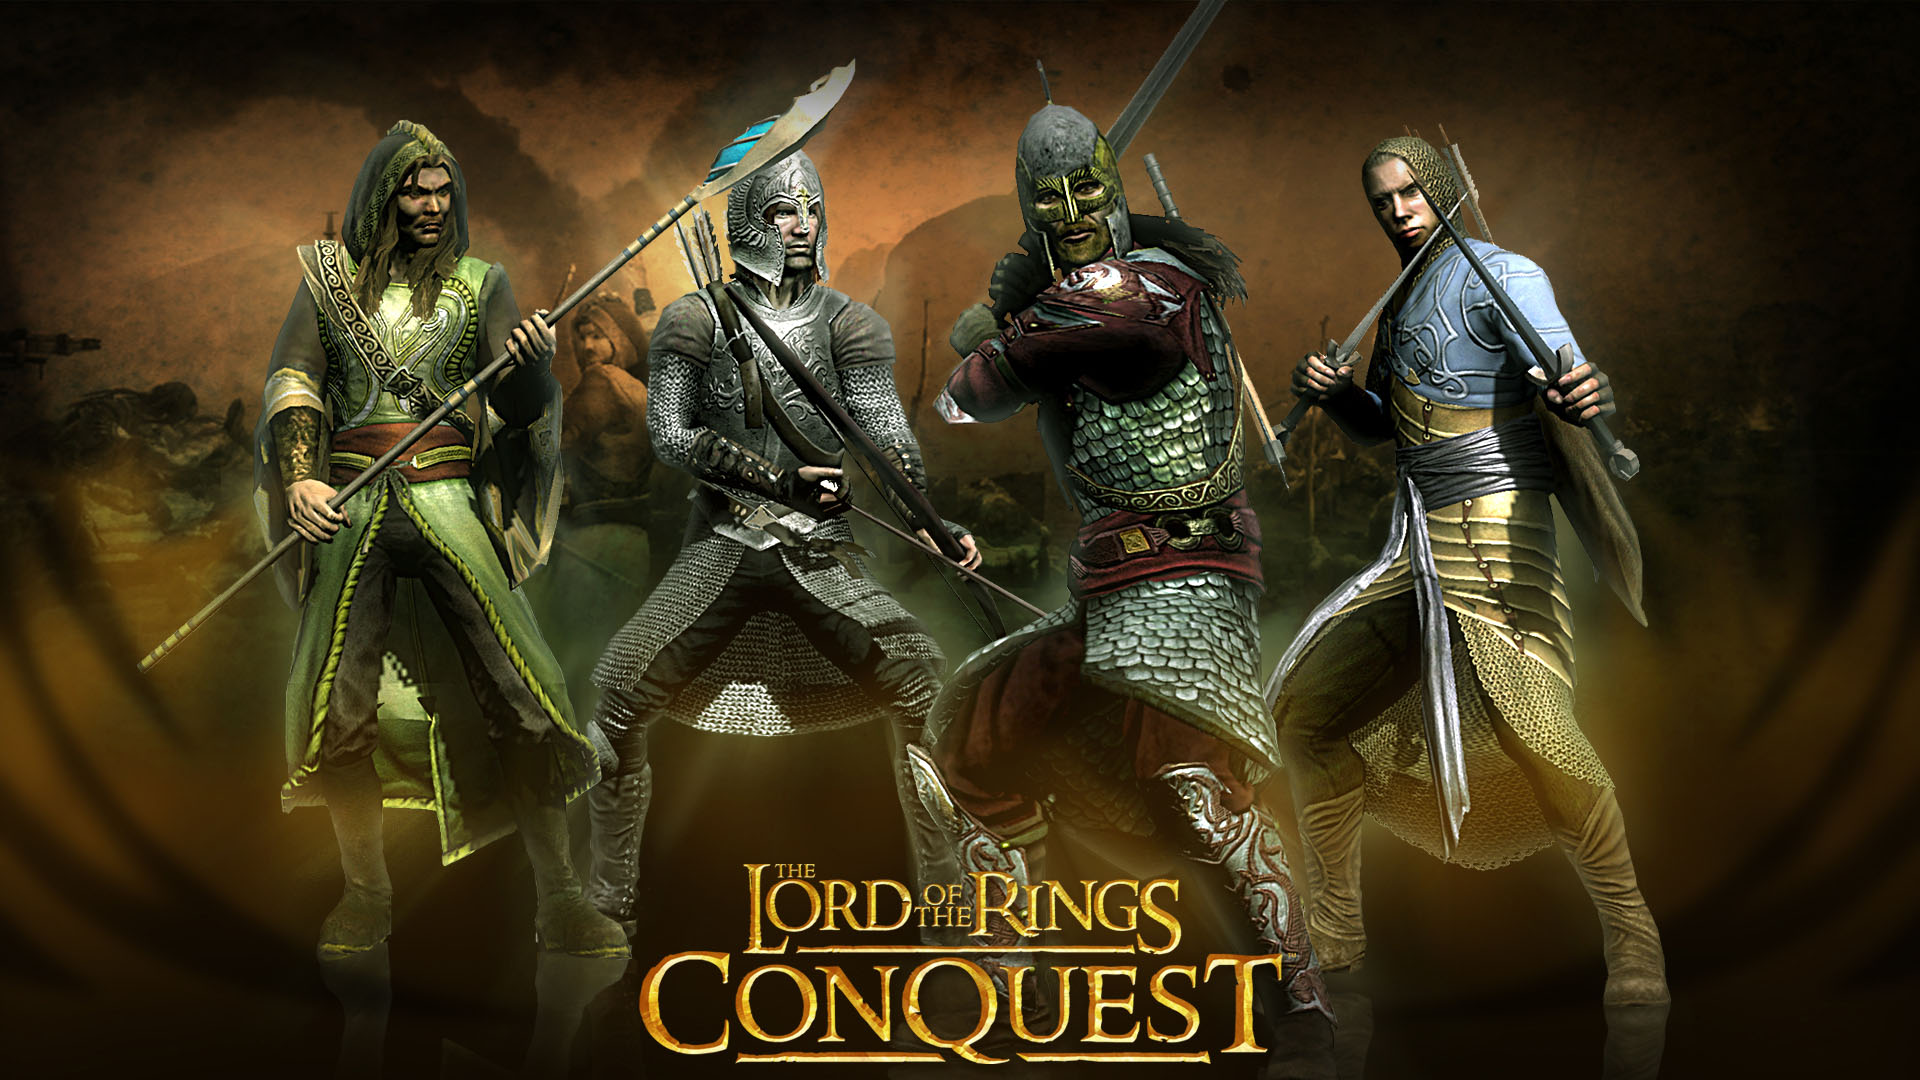   The Lord Of The Rings Conquest   -  5